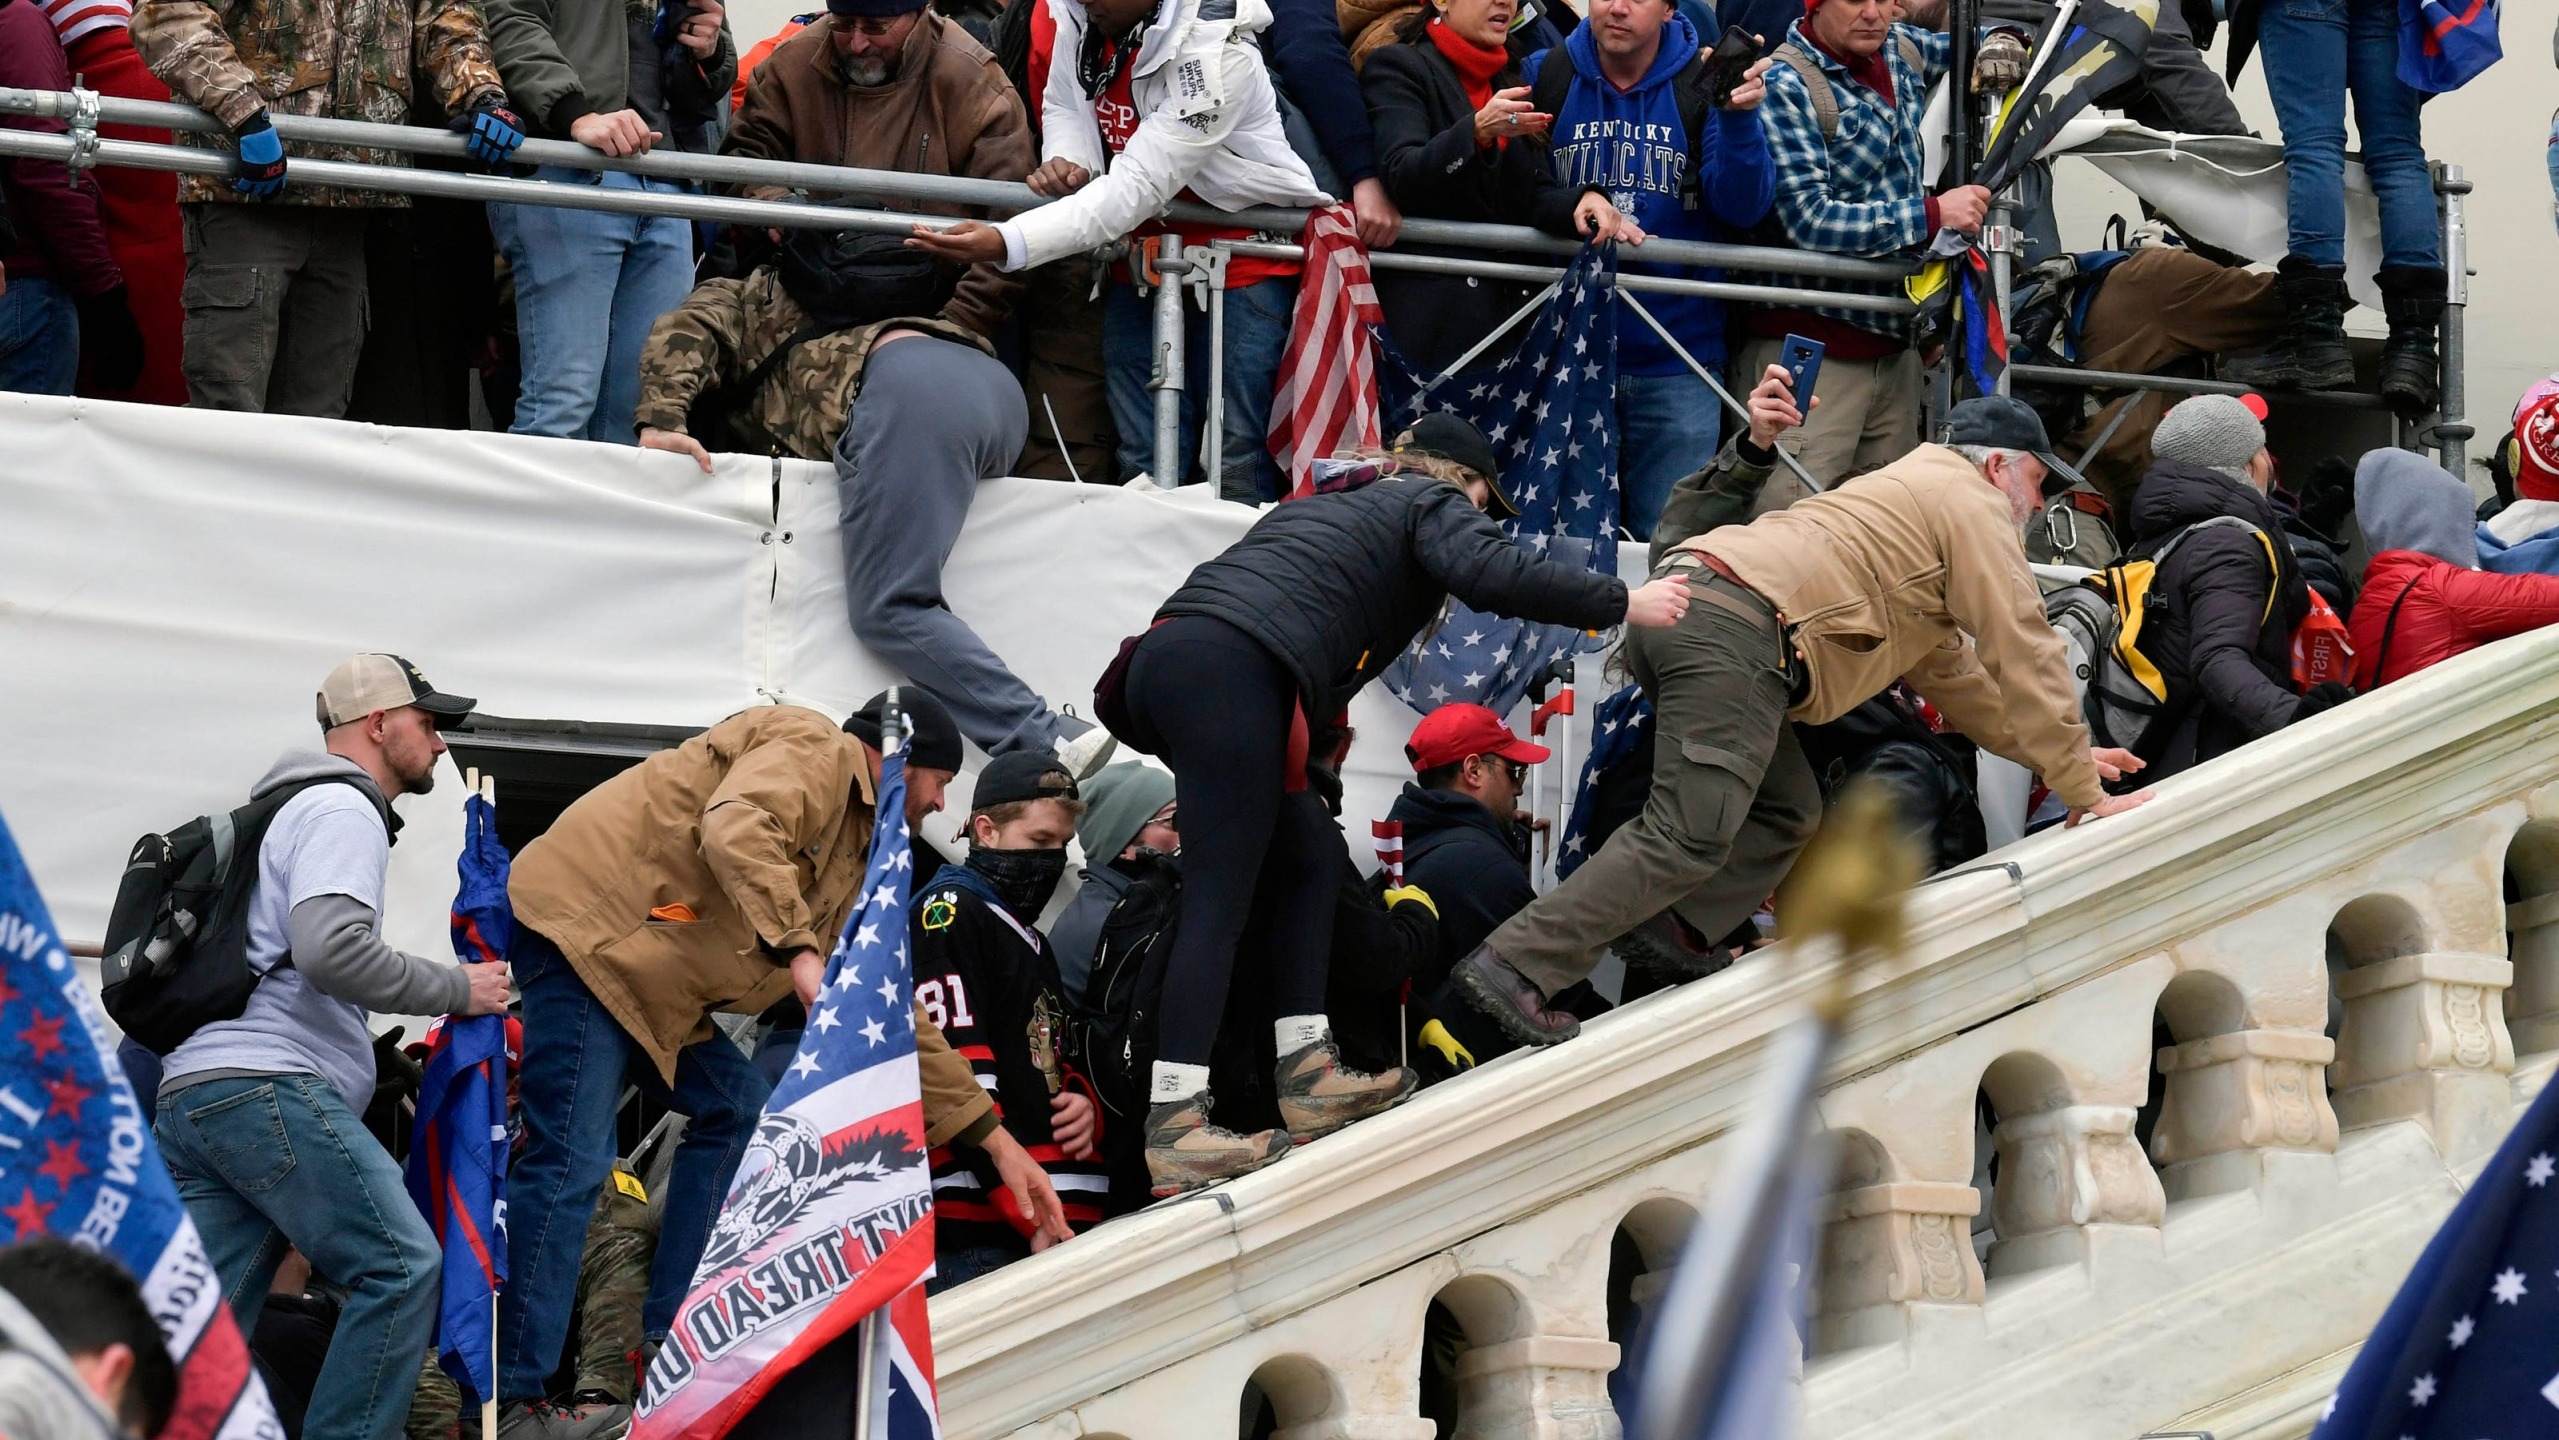 High Quality Republicans stopping violence in America - capitol riot Blank Meme Template